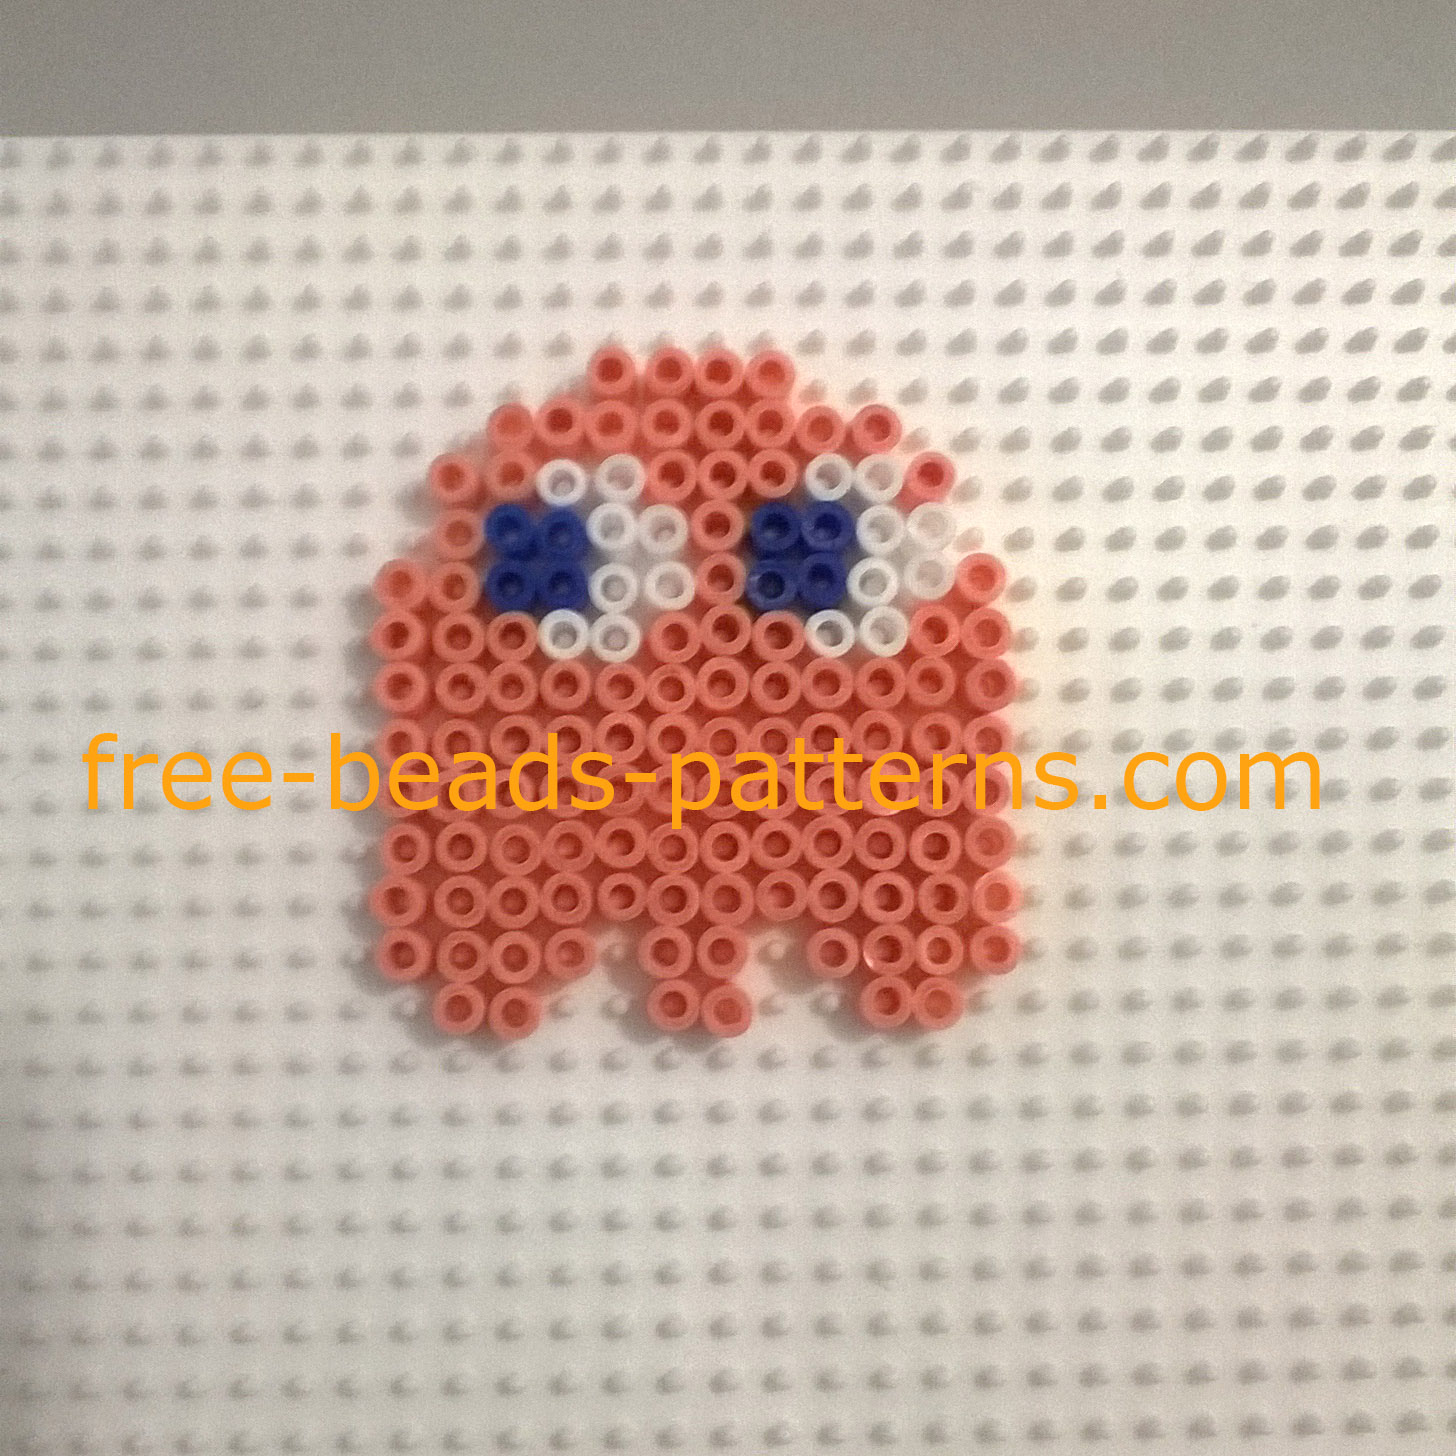 Pacman enemy Pinky work photo fuse beads author site user Bill (4)